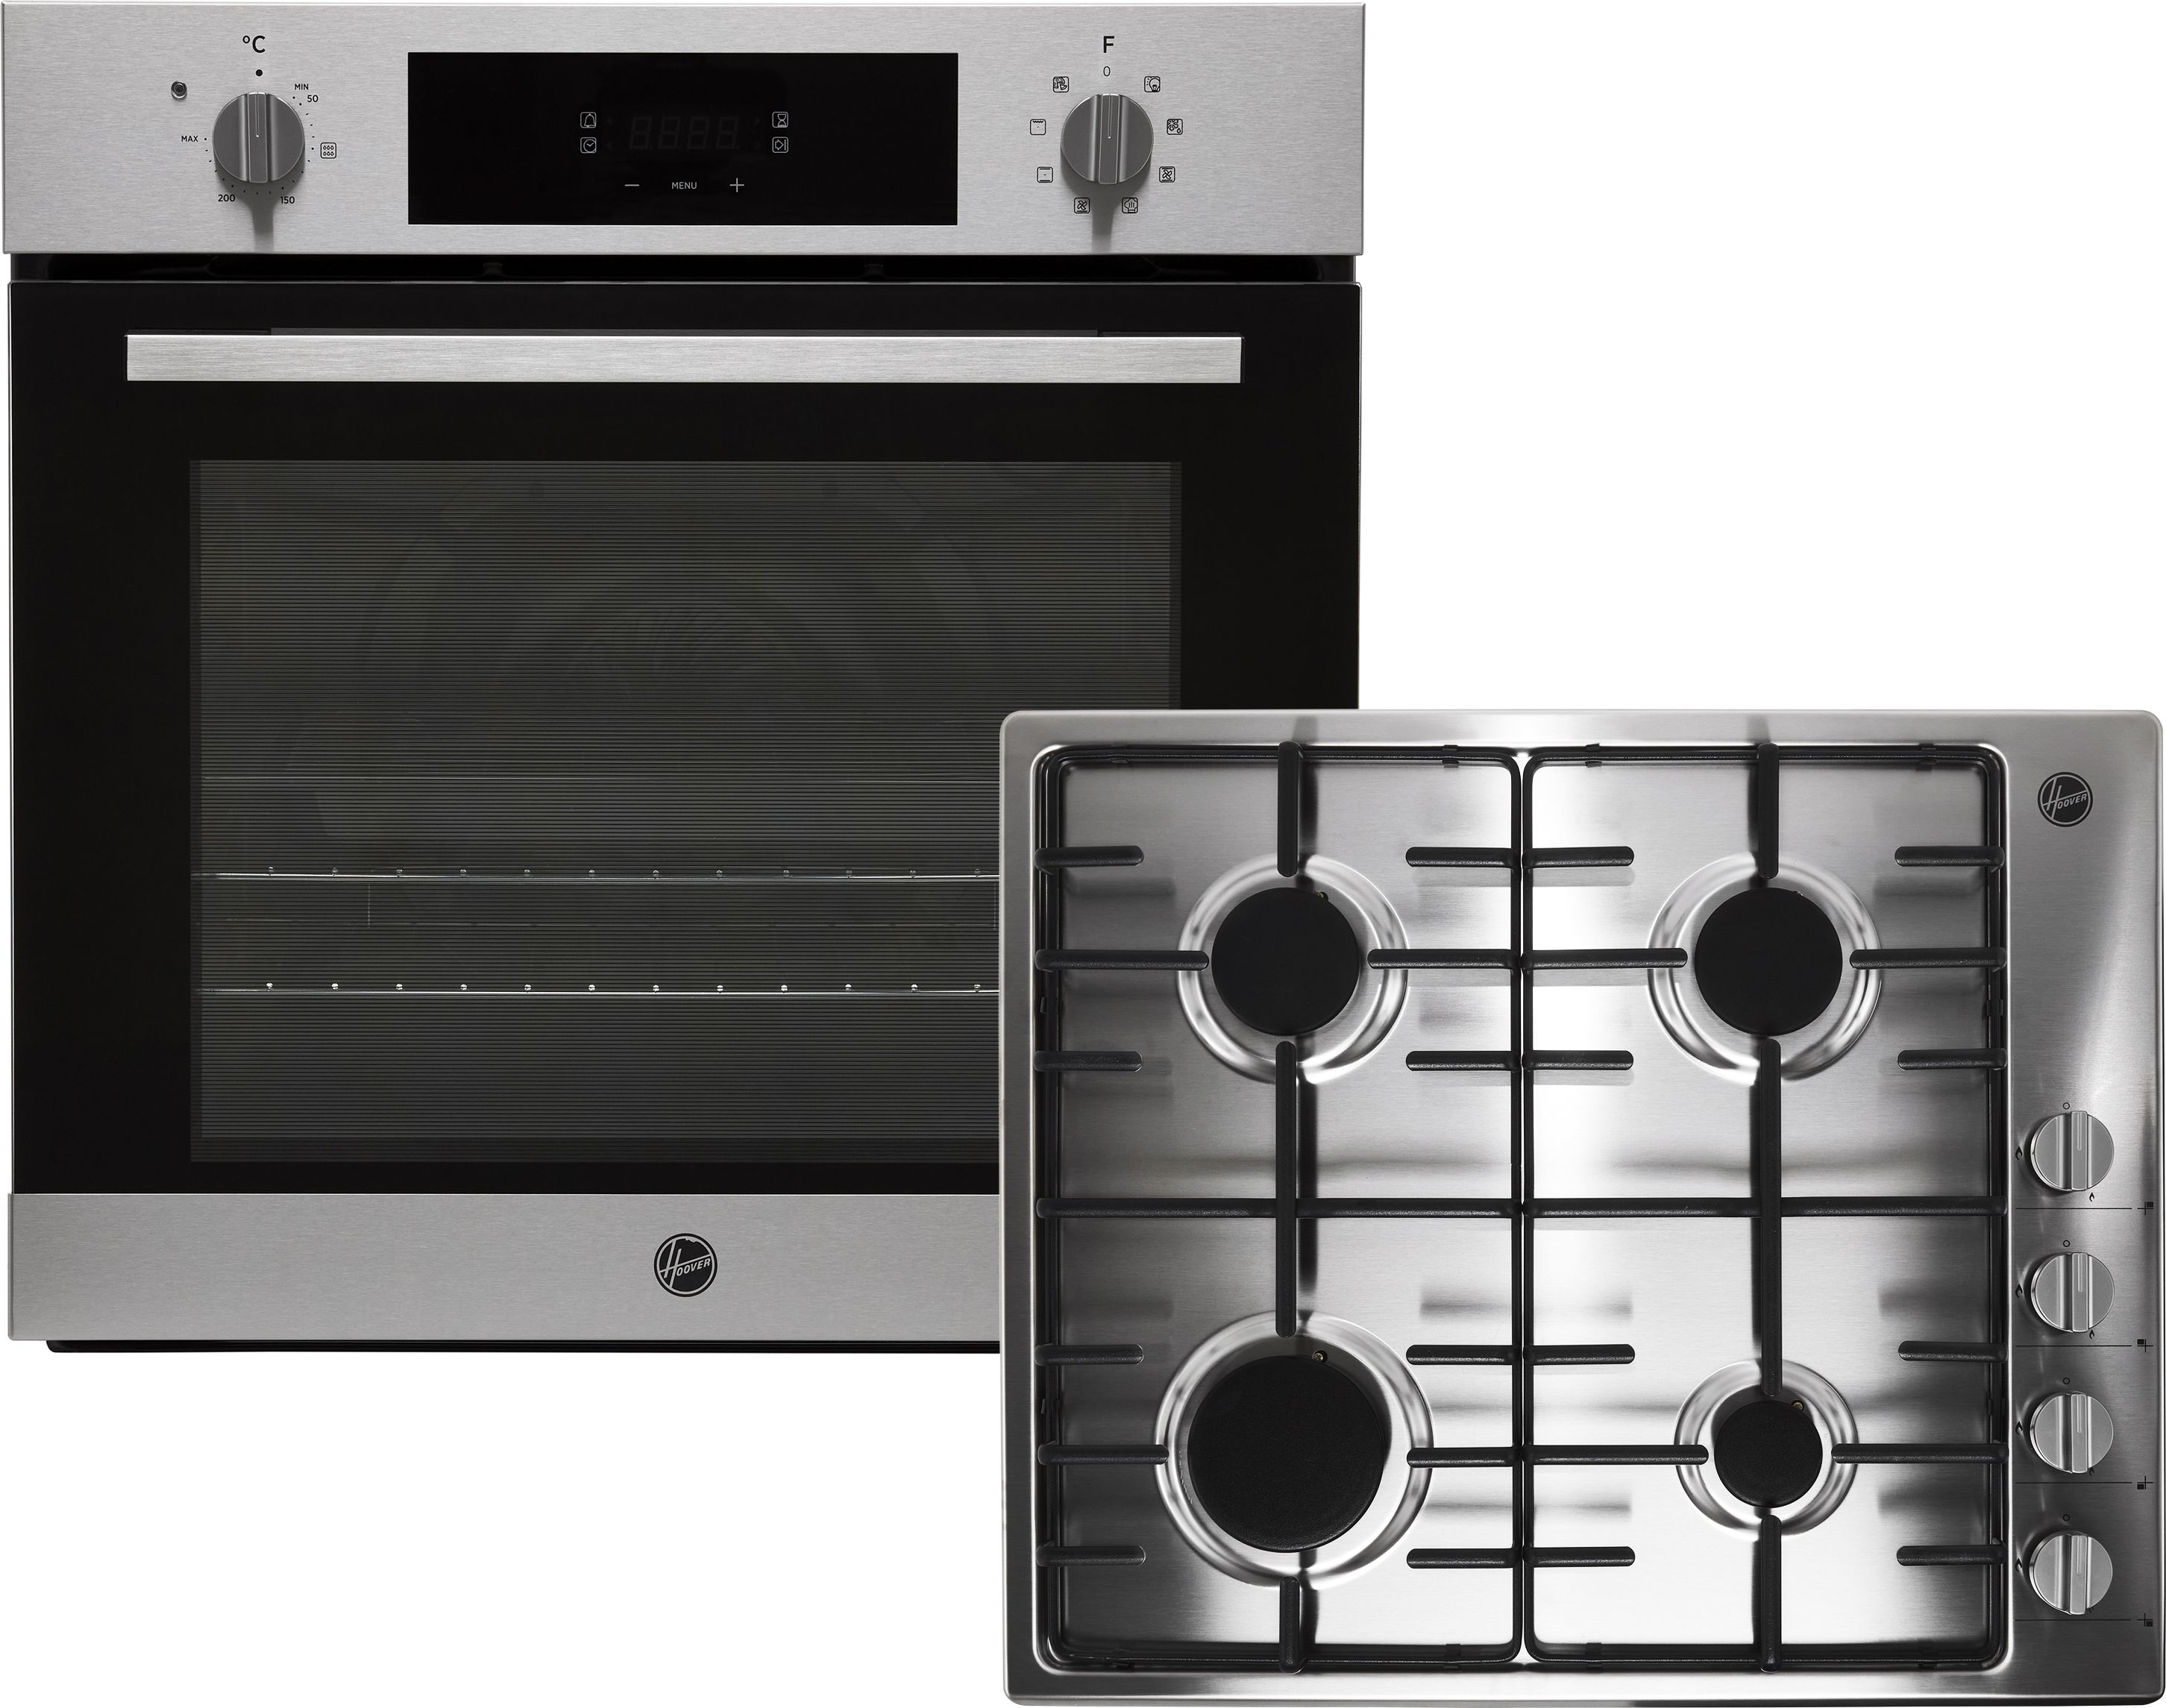 Hoover H-OVEN 300 PHC3B25CXHHW6LK3 Built In Electric Single Oven and Gas Hob Pack - Stainless Steel - A+ Rated, Stainless Steel